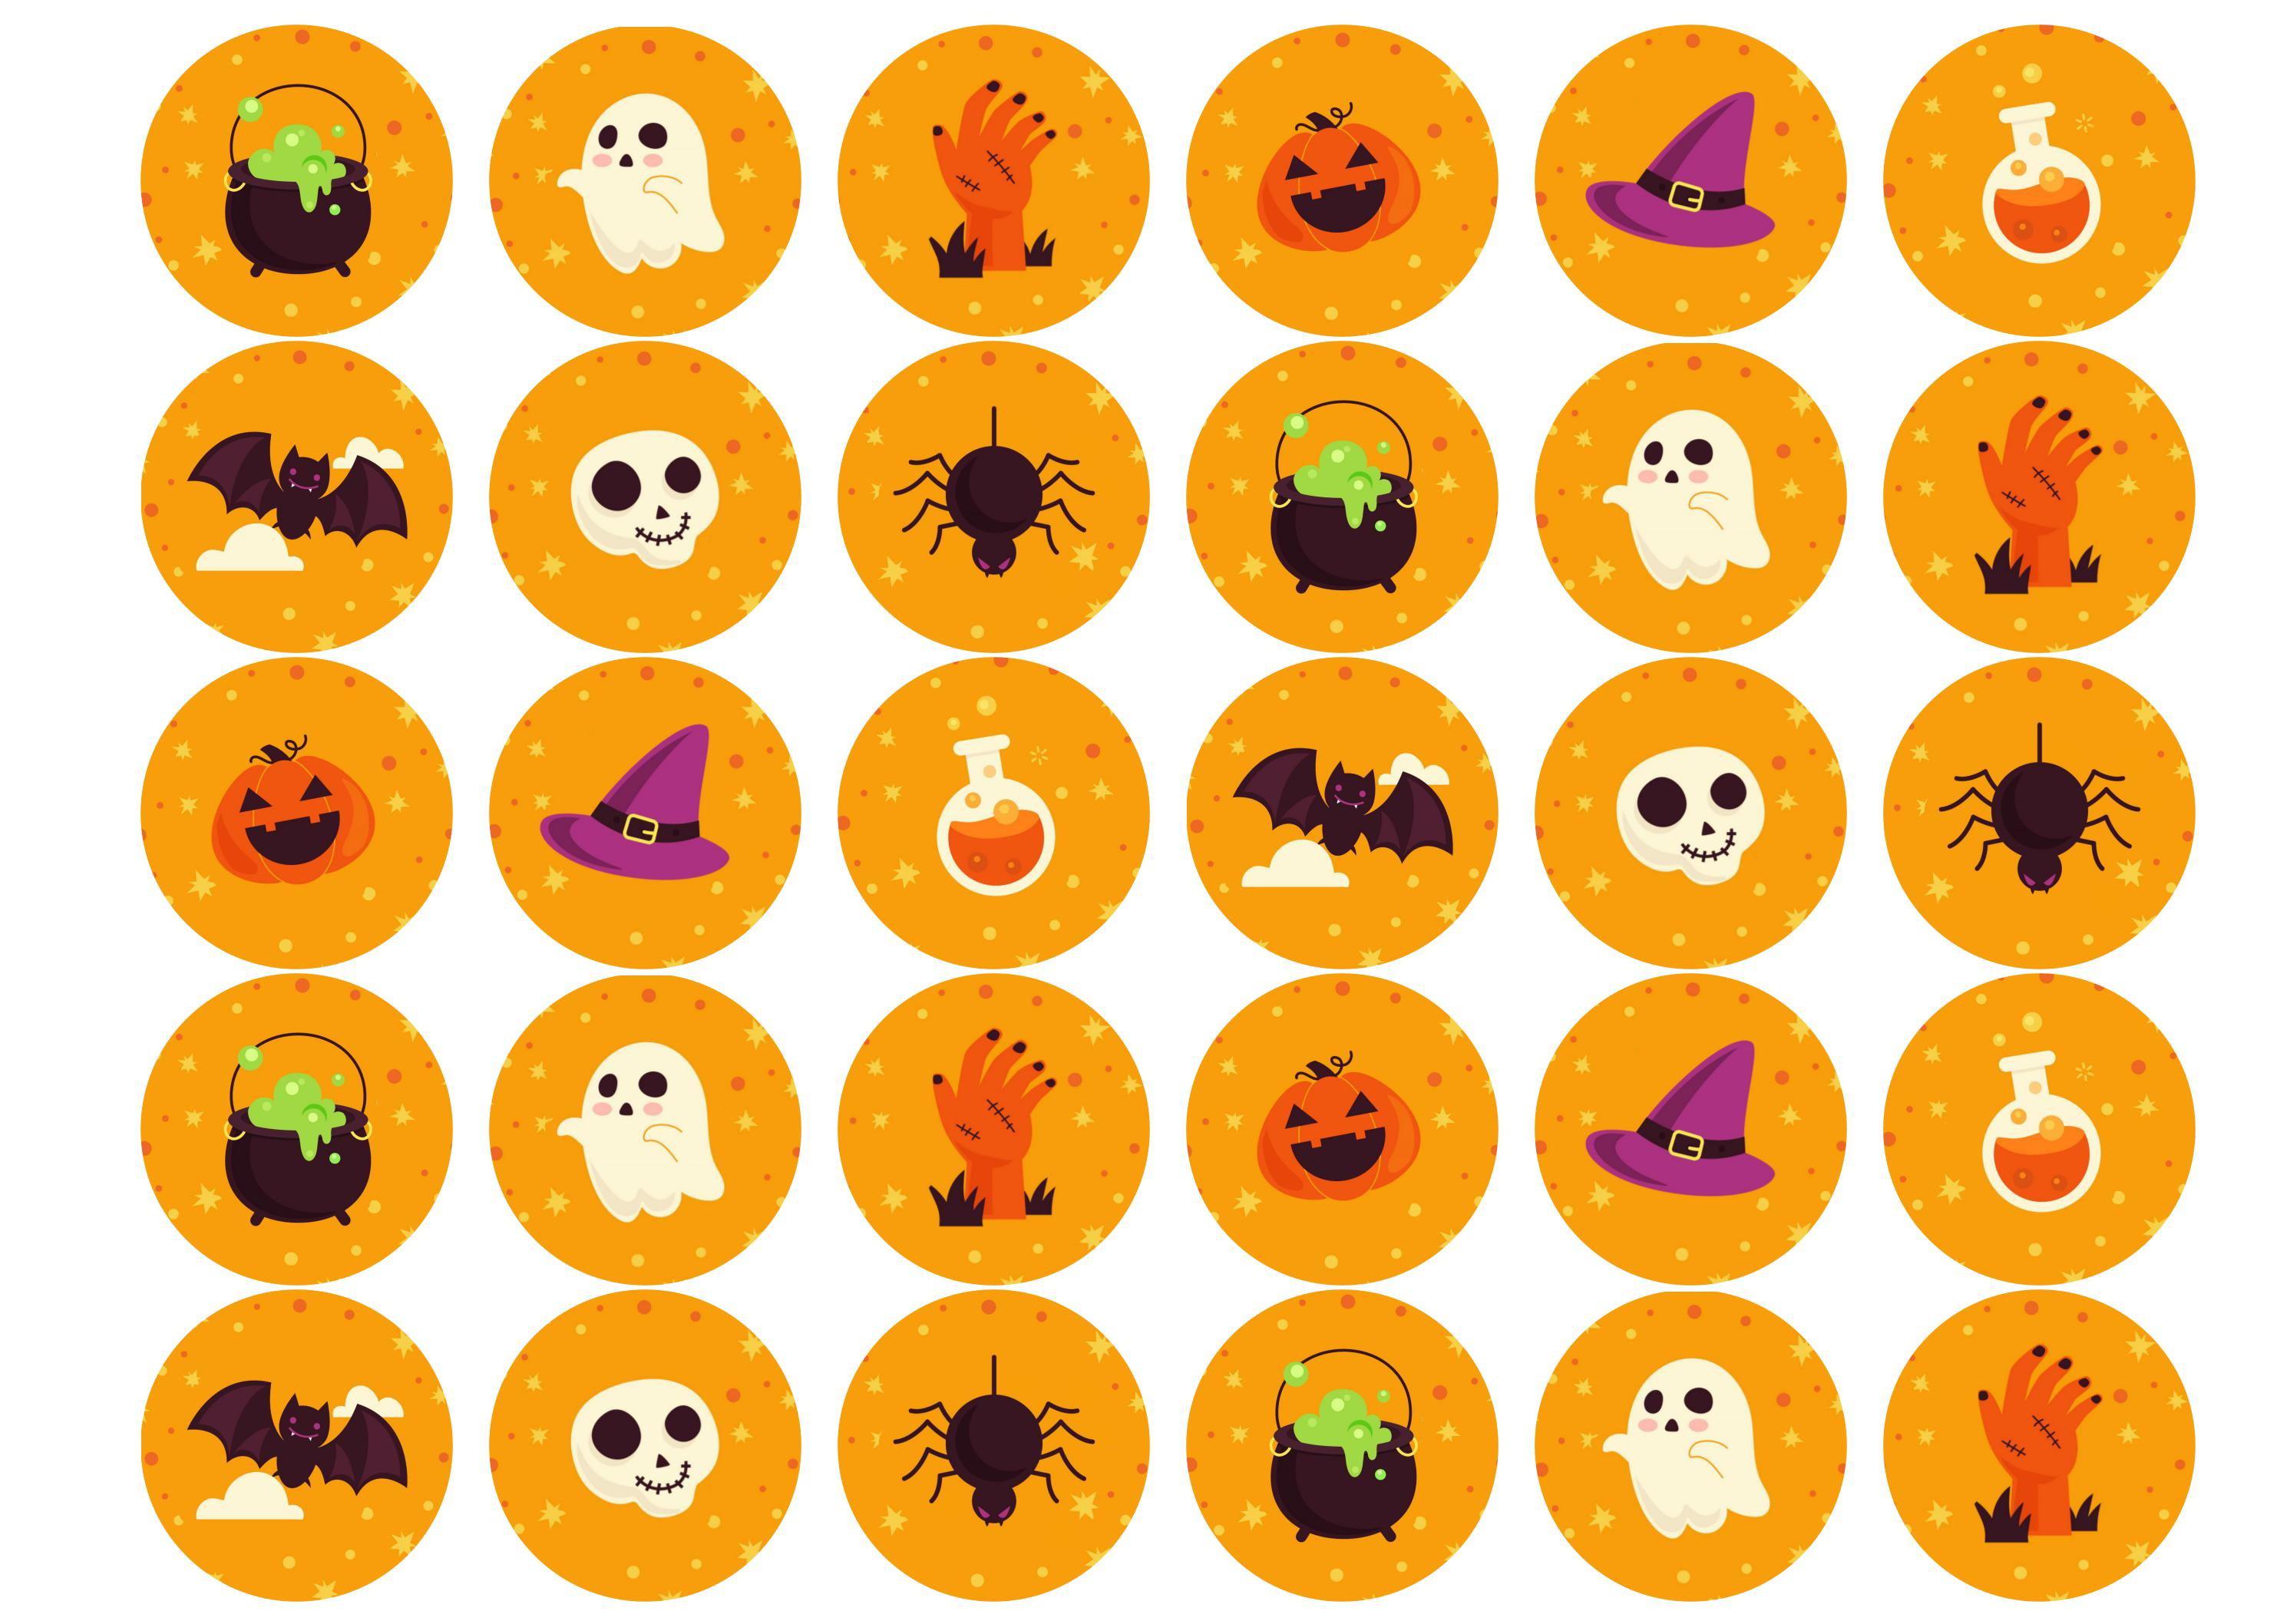 30 edible printed cupcake toppers with orange halloween images